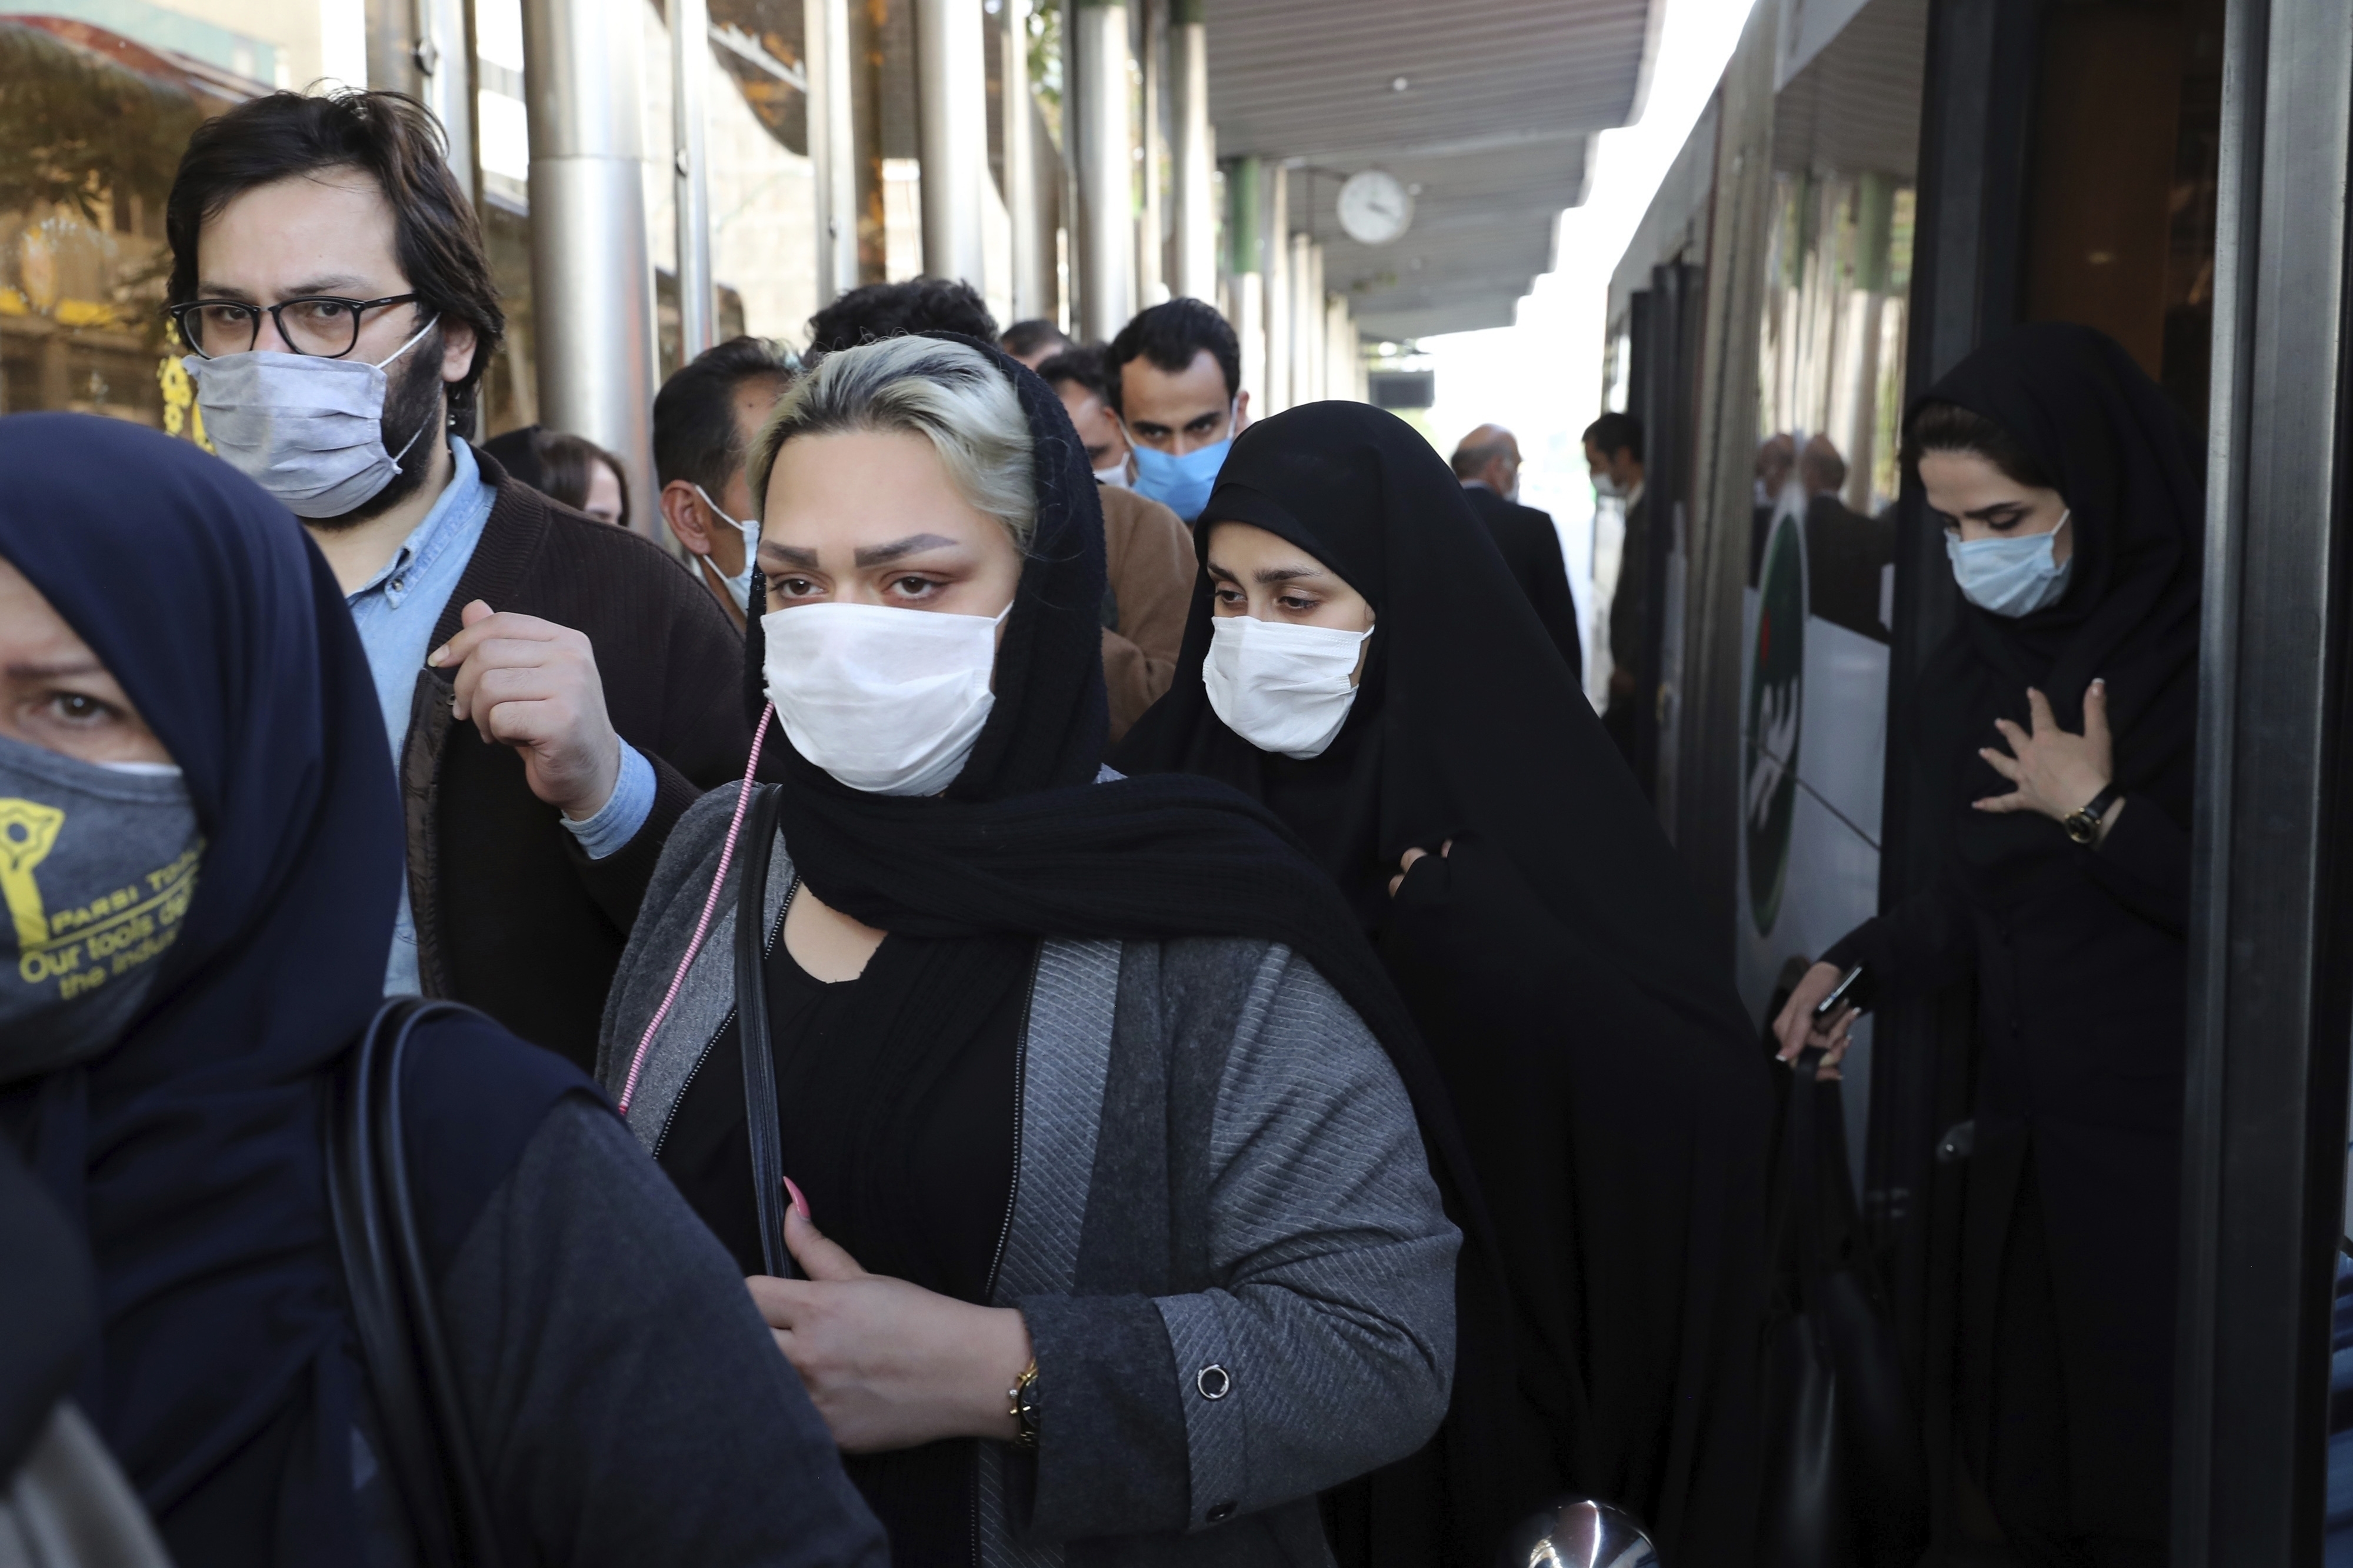 FILE - In this Oct. 11, 2020, file photo, people wear protective face masks to help prevent the spread of the coronavirus in downtown Tehran, Iran. On Tuesday, Nov. 10, 2020, Iran was set to impose a nightly business curfew in its capital for the first time as the country battles a major surge in coronavirus infections. (AP Photo/Ebrahim Noroozi, File)